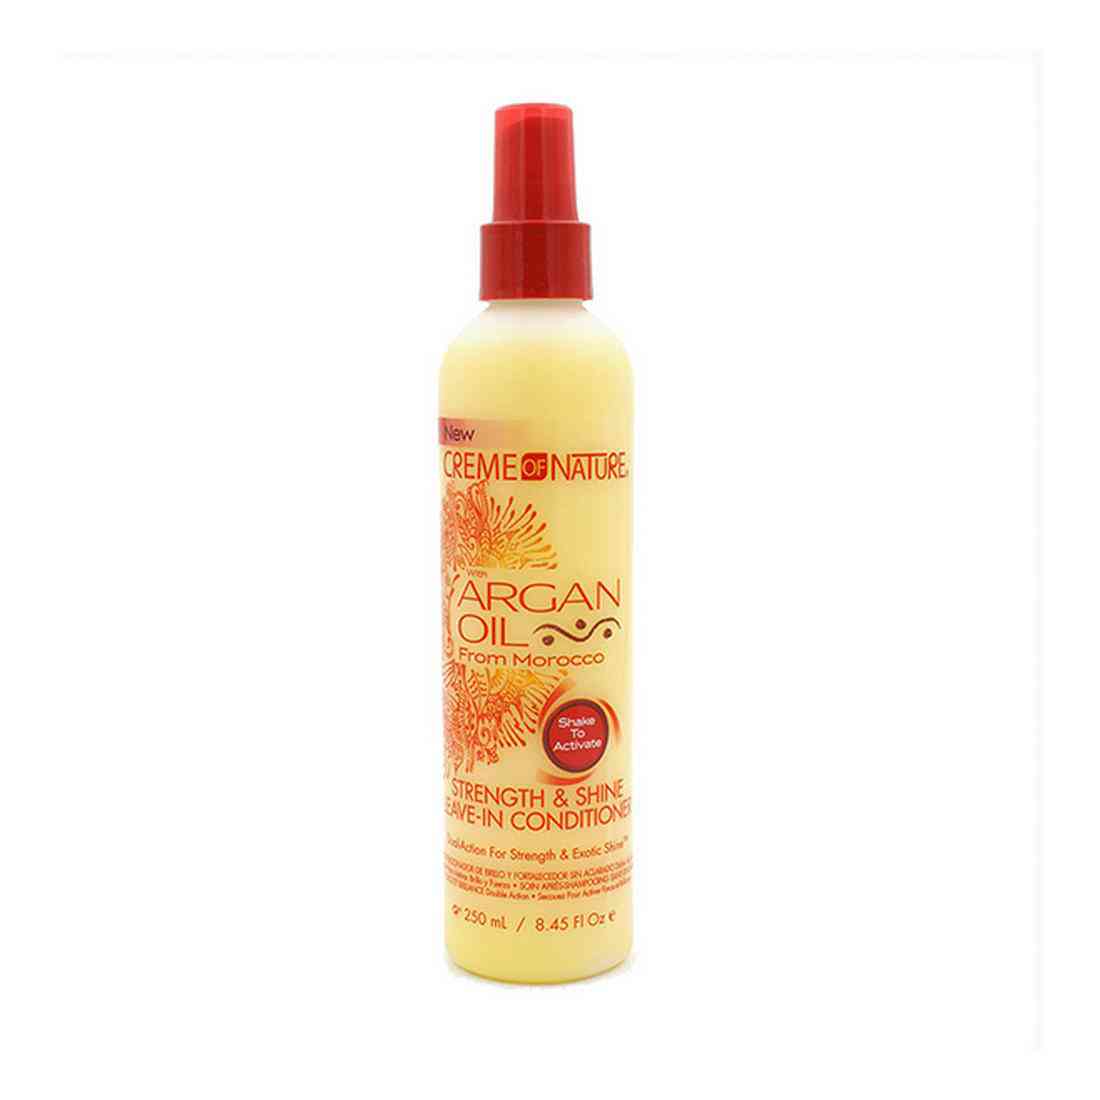 apres shampooing leave in creme of nature argan oil 250 ml